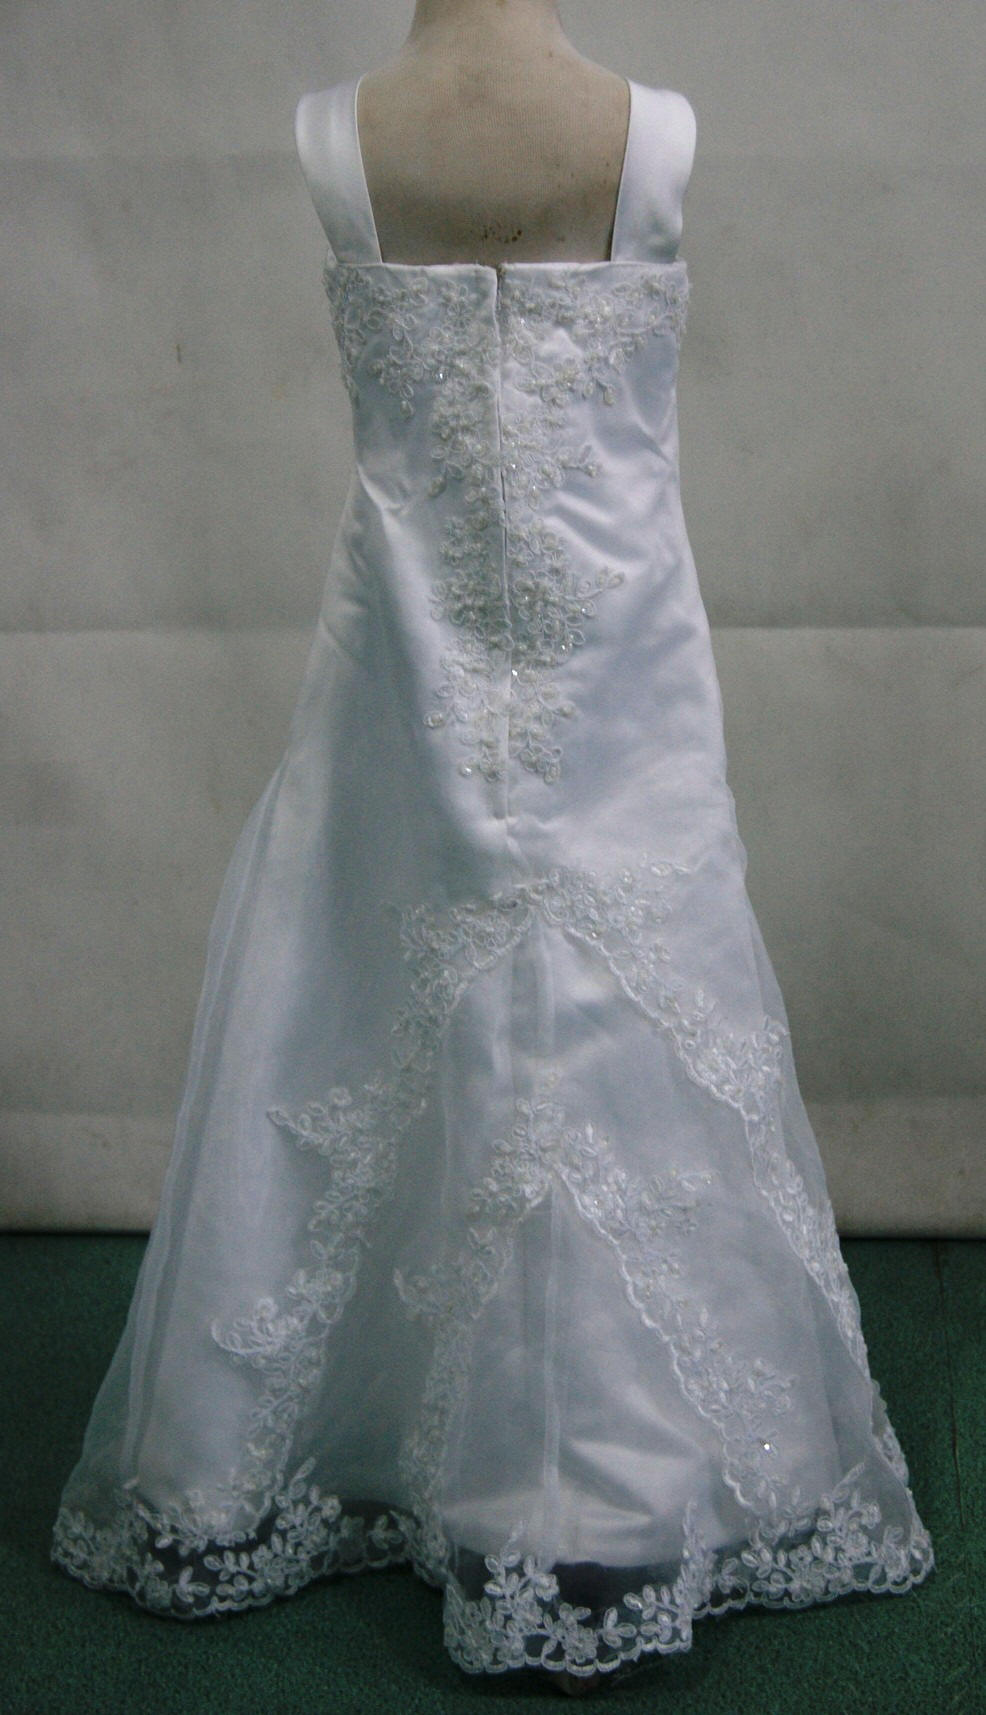 Miniature bridal gown with lace appliques.